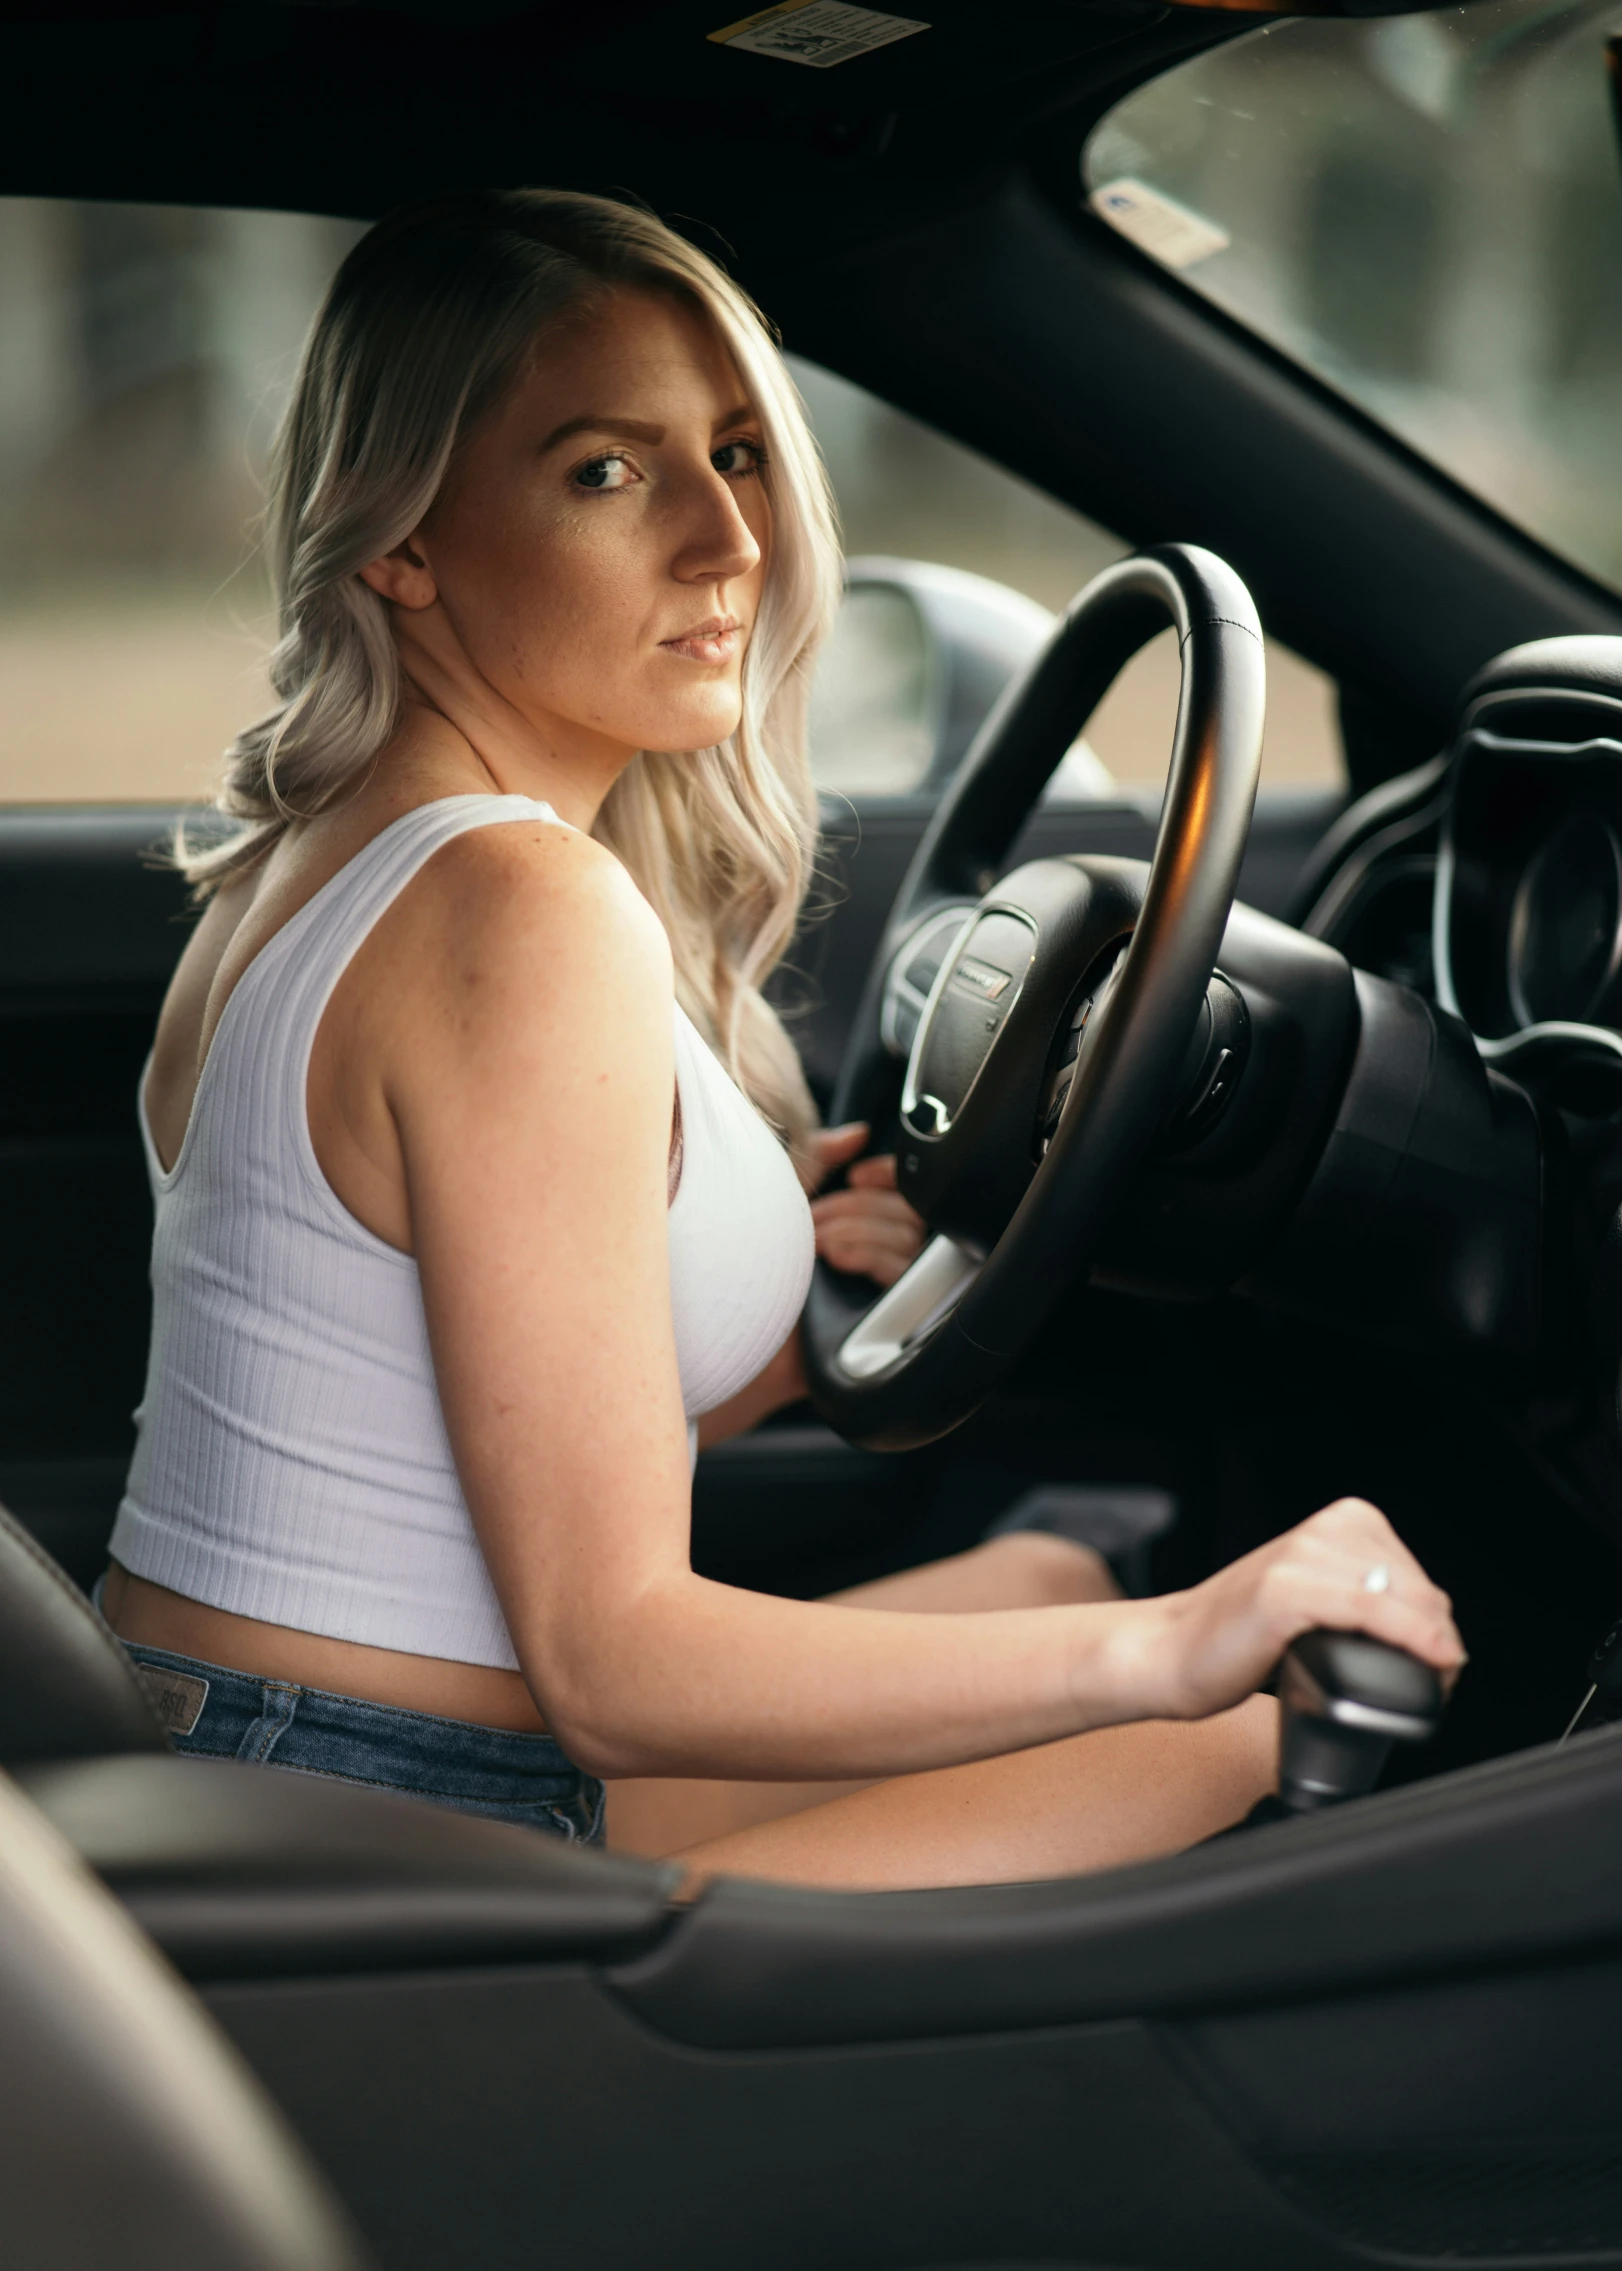 the woman sitting in the driver's seat is holding the steering wheel and wearing jeans